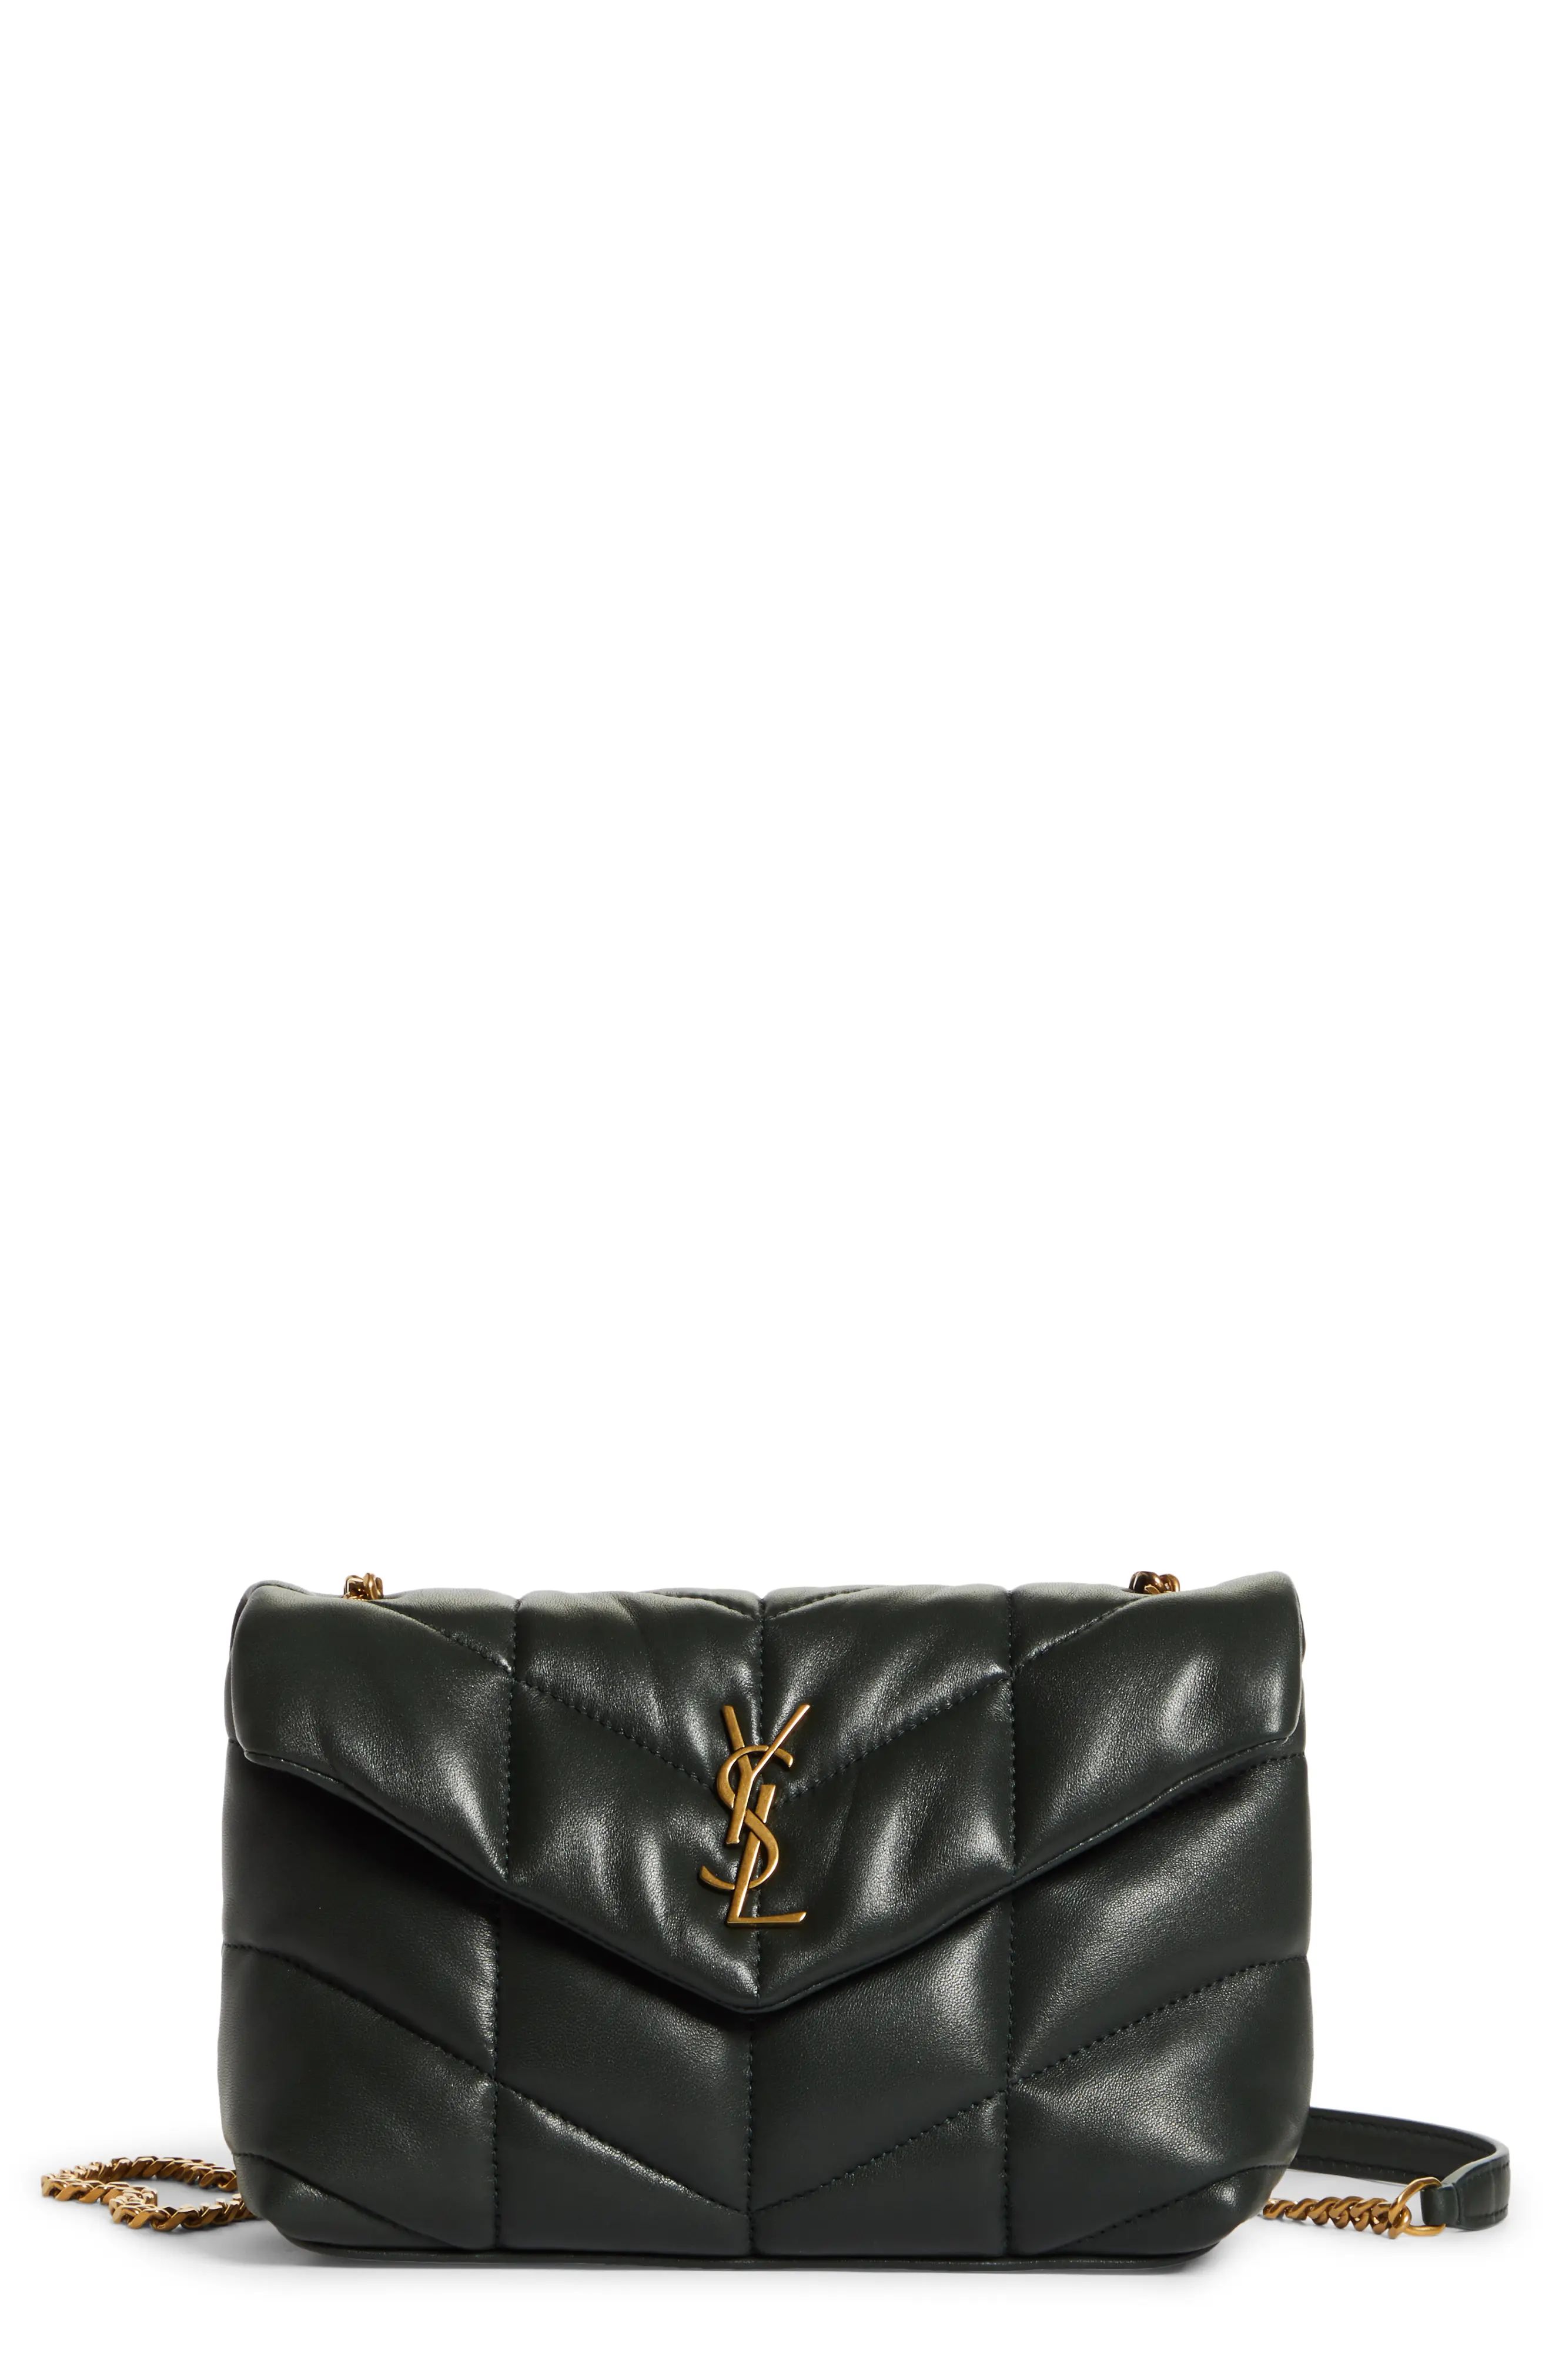 Saint Laurent Toy Loulou Puffer Quilted Leather Crossbody Bag - Green | Nordstrom